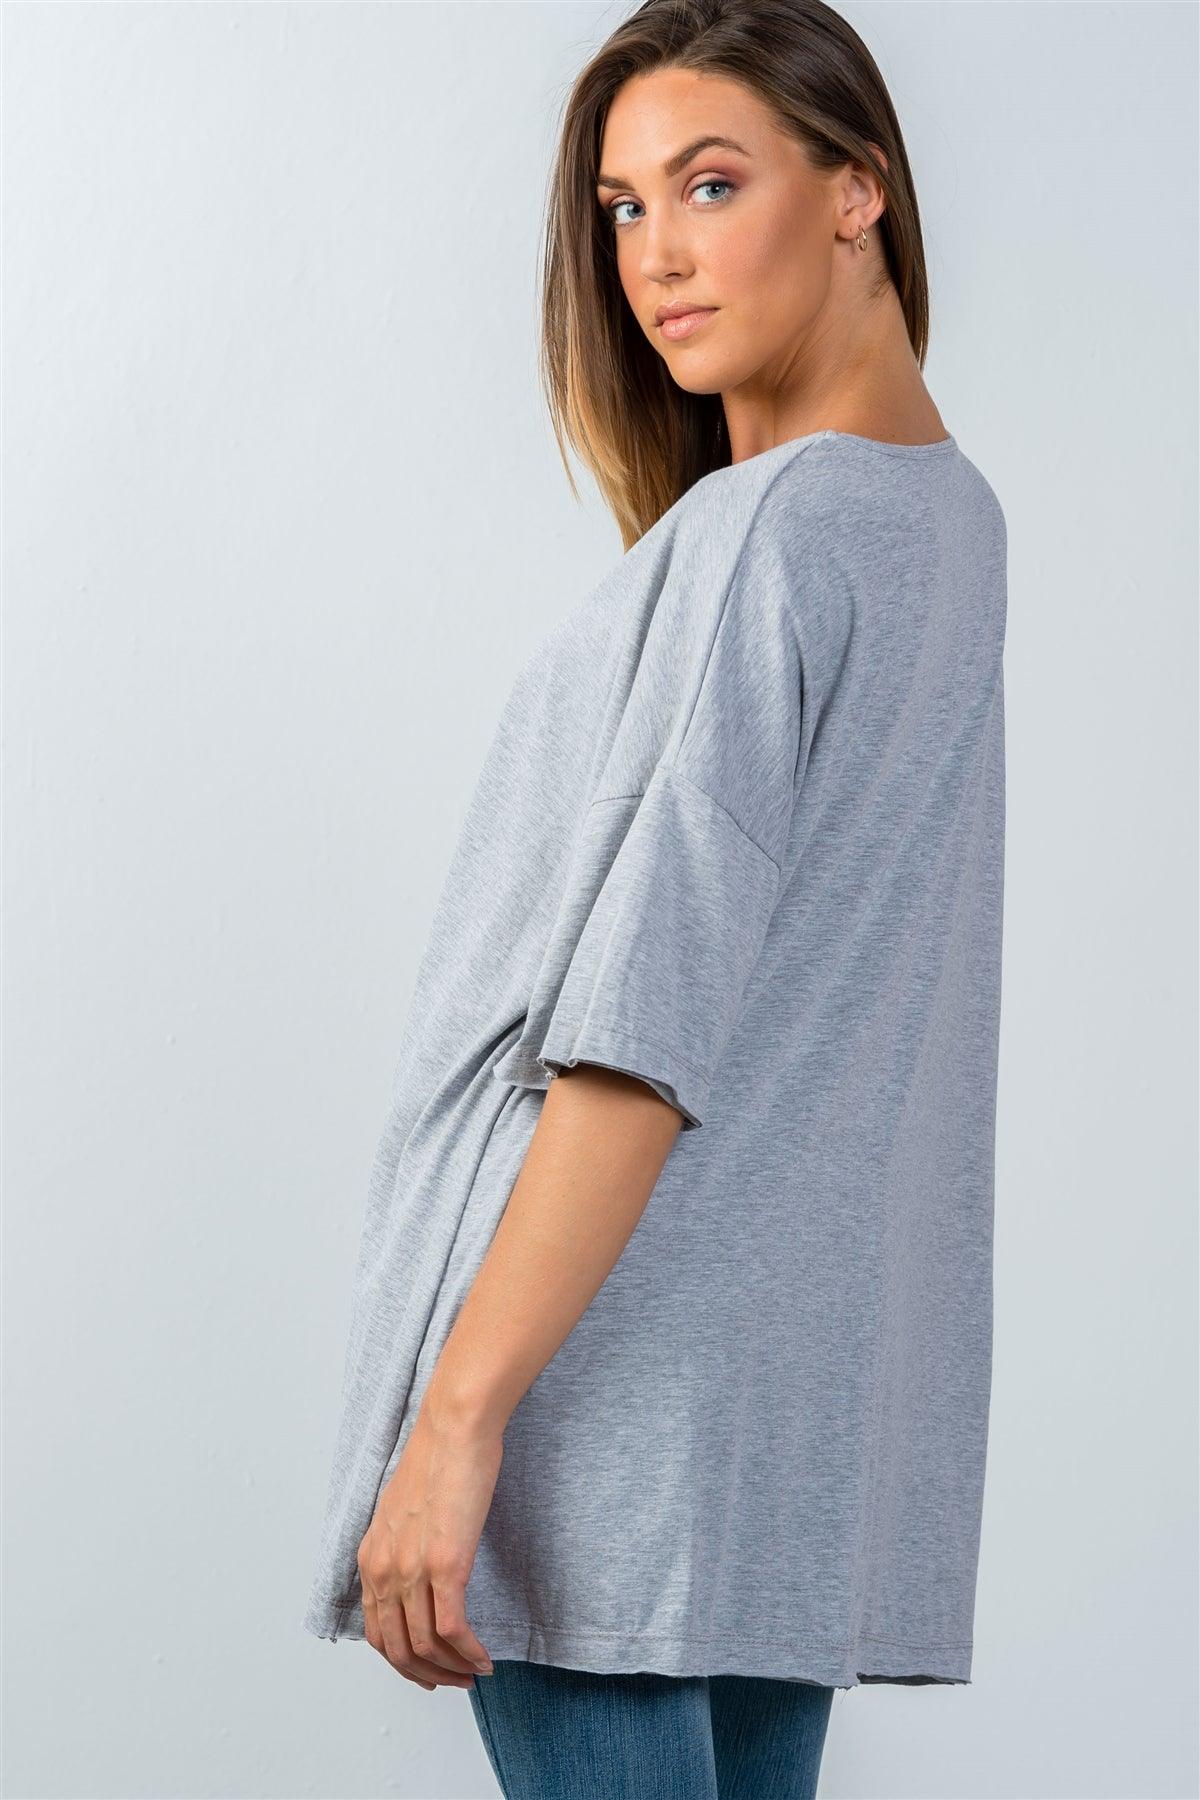 Heather Grey Dropped Shoulder Tunic Top / 3-3